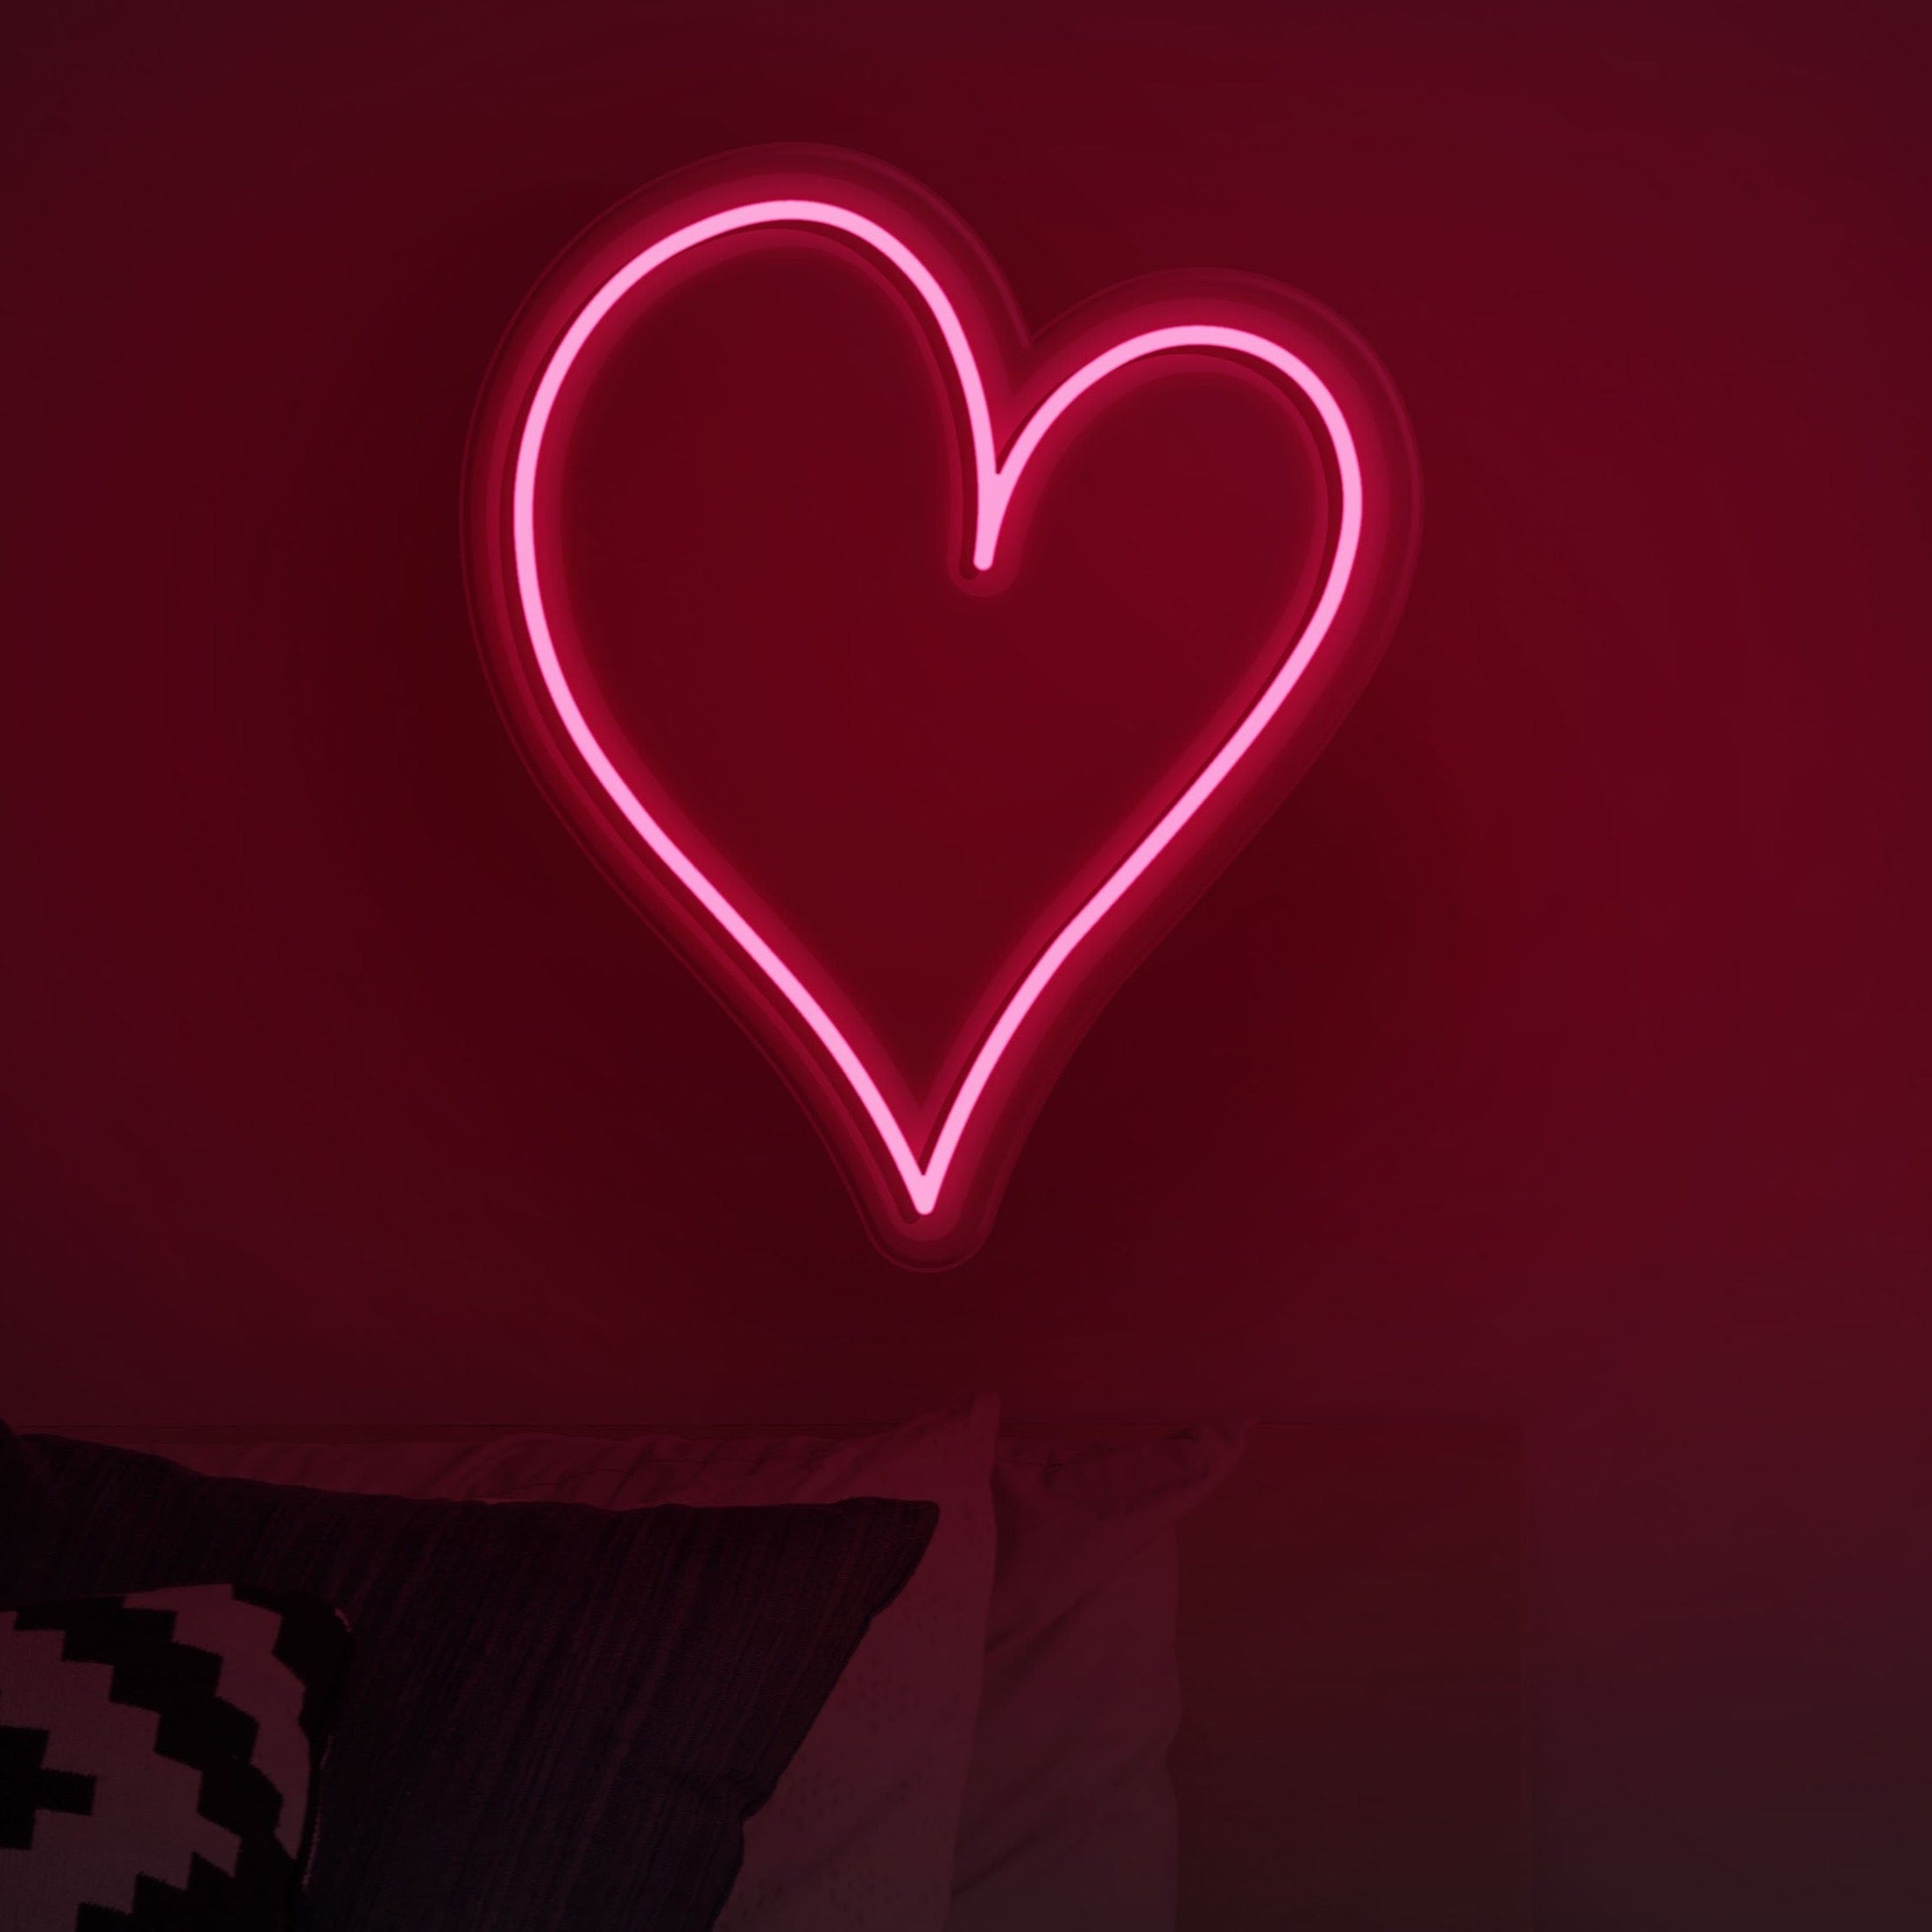 A neon heart shaped light is on the wall - Neon red